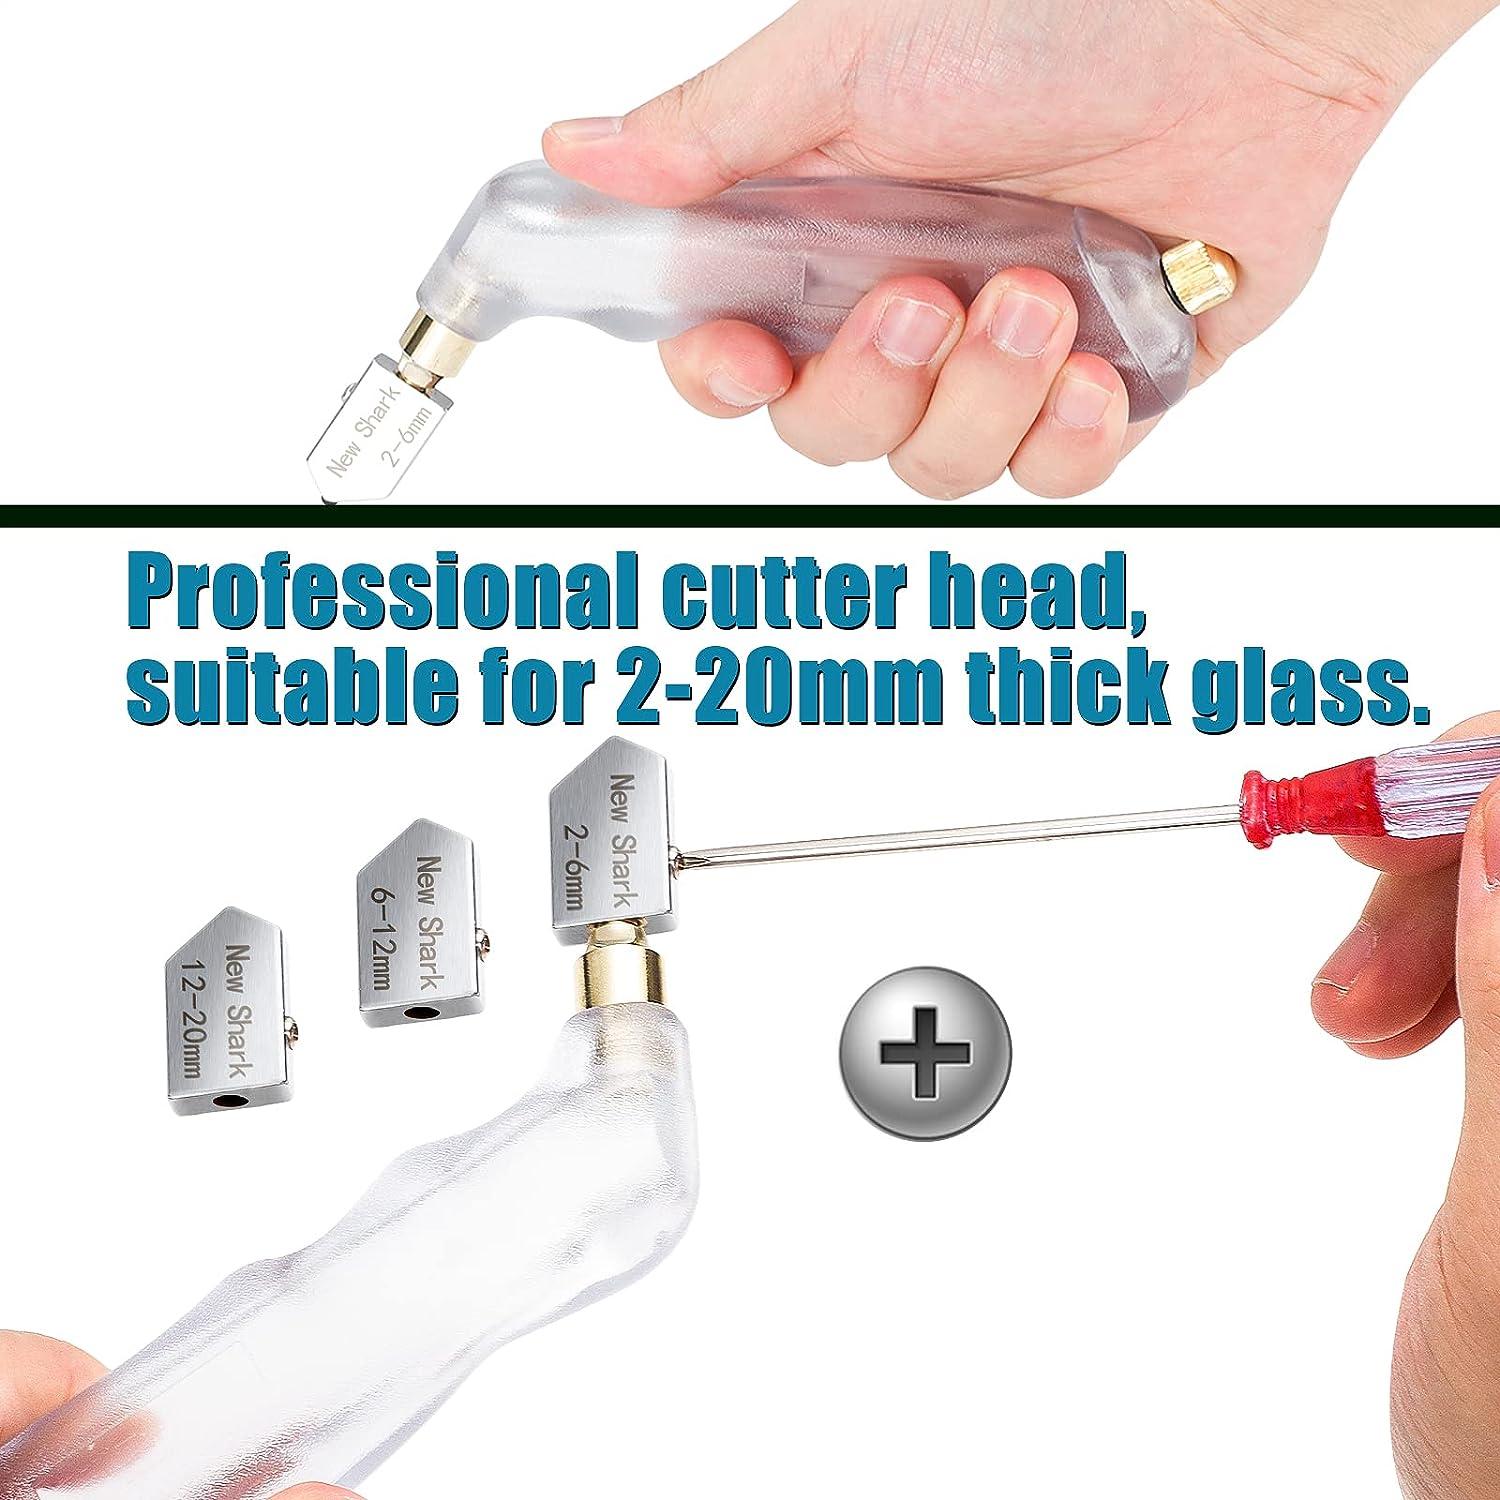  Professional Stained Glass Cutting Tool Pistol Grip Oil Feed Glass  Cutter Cuts Windows, Mirrors and Oil Reservoir